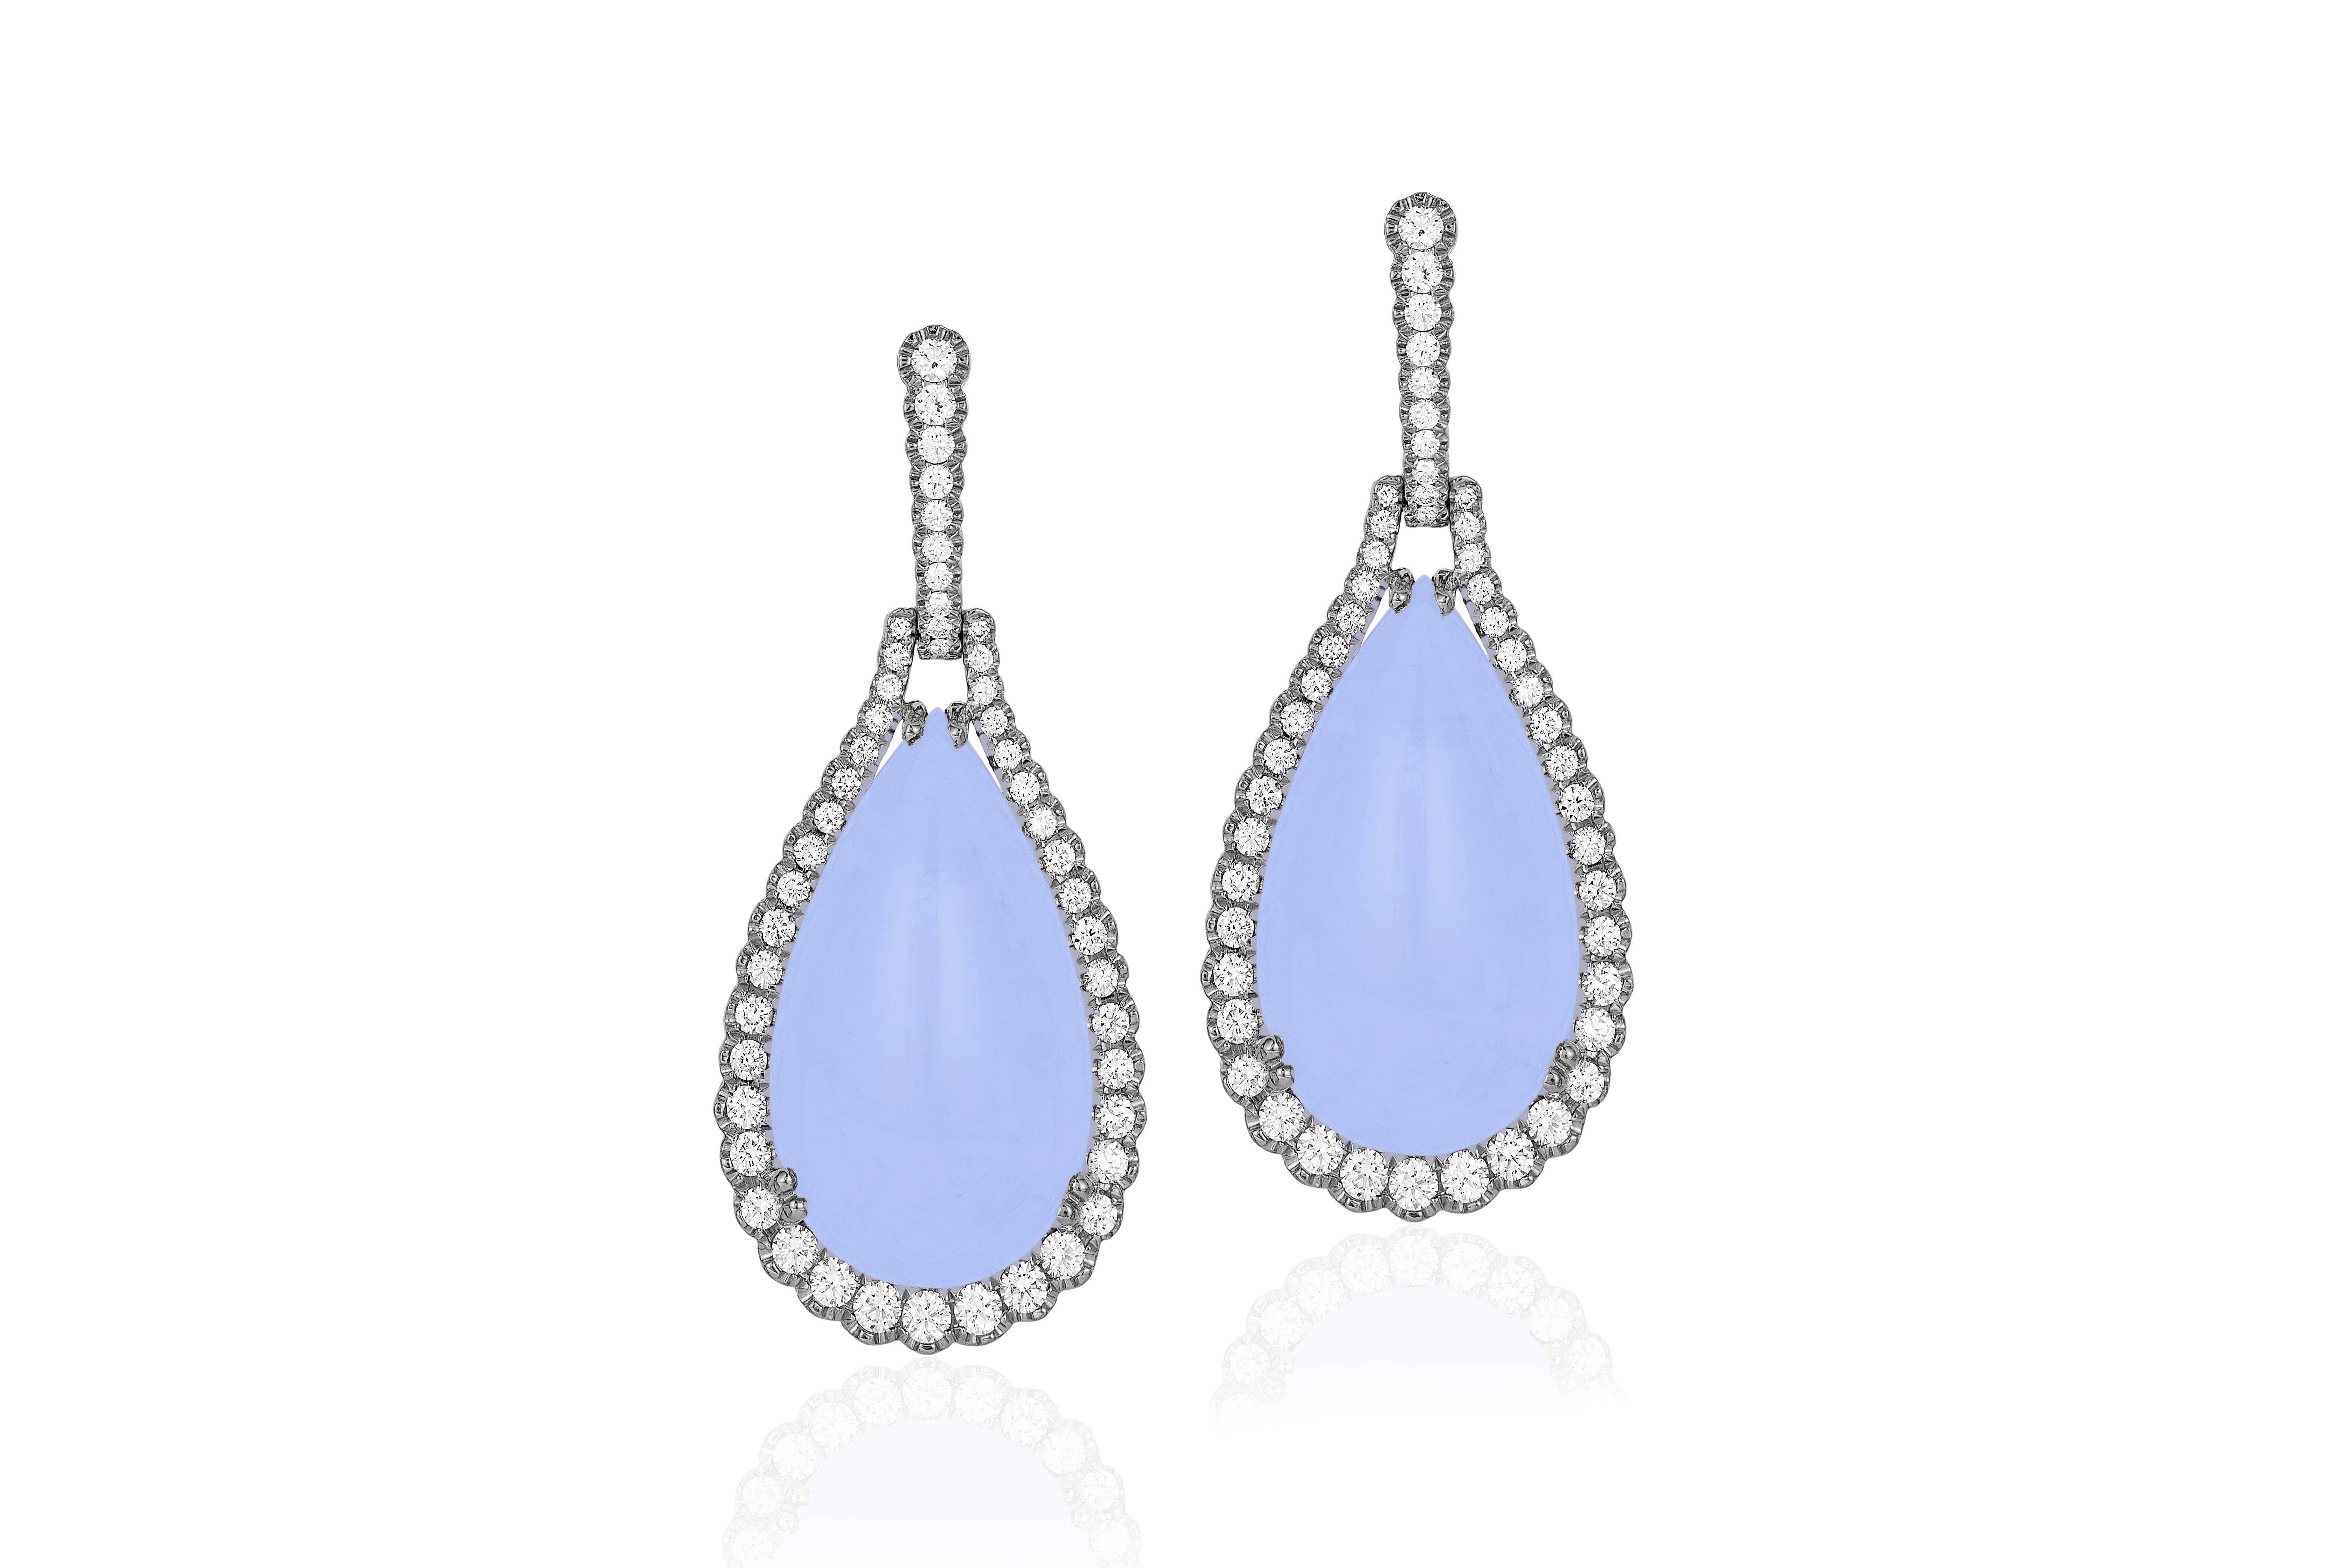 Blue Chalcedony Fat Drop Earrings with Diamonds in 18K White Gold And Black Rhodium, 'Limited-Edition' 

Stone Size: 31 x 15.3 mm 

Approx. Stone Wt: 68.38 Carats (Blue Chalcedony) 

Diamonds: G-H / VS, Approx. Wt: 1.84 Carats 